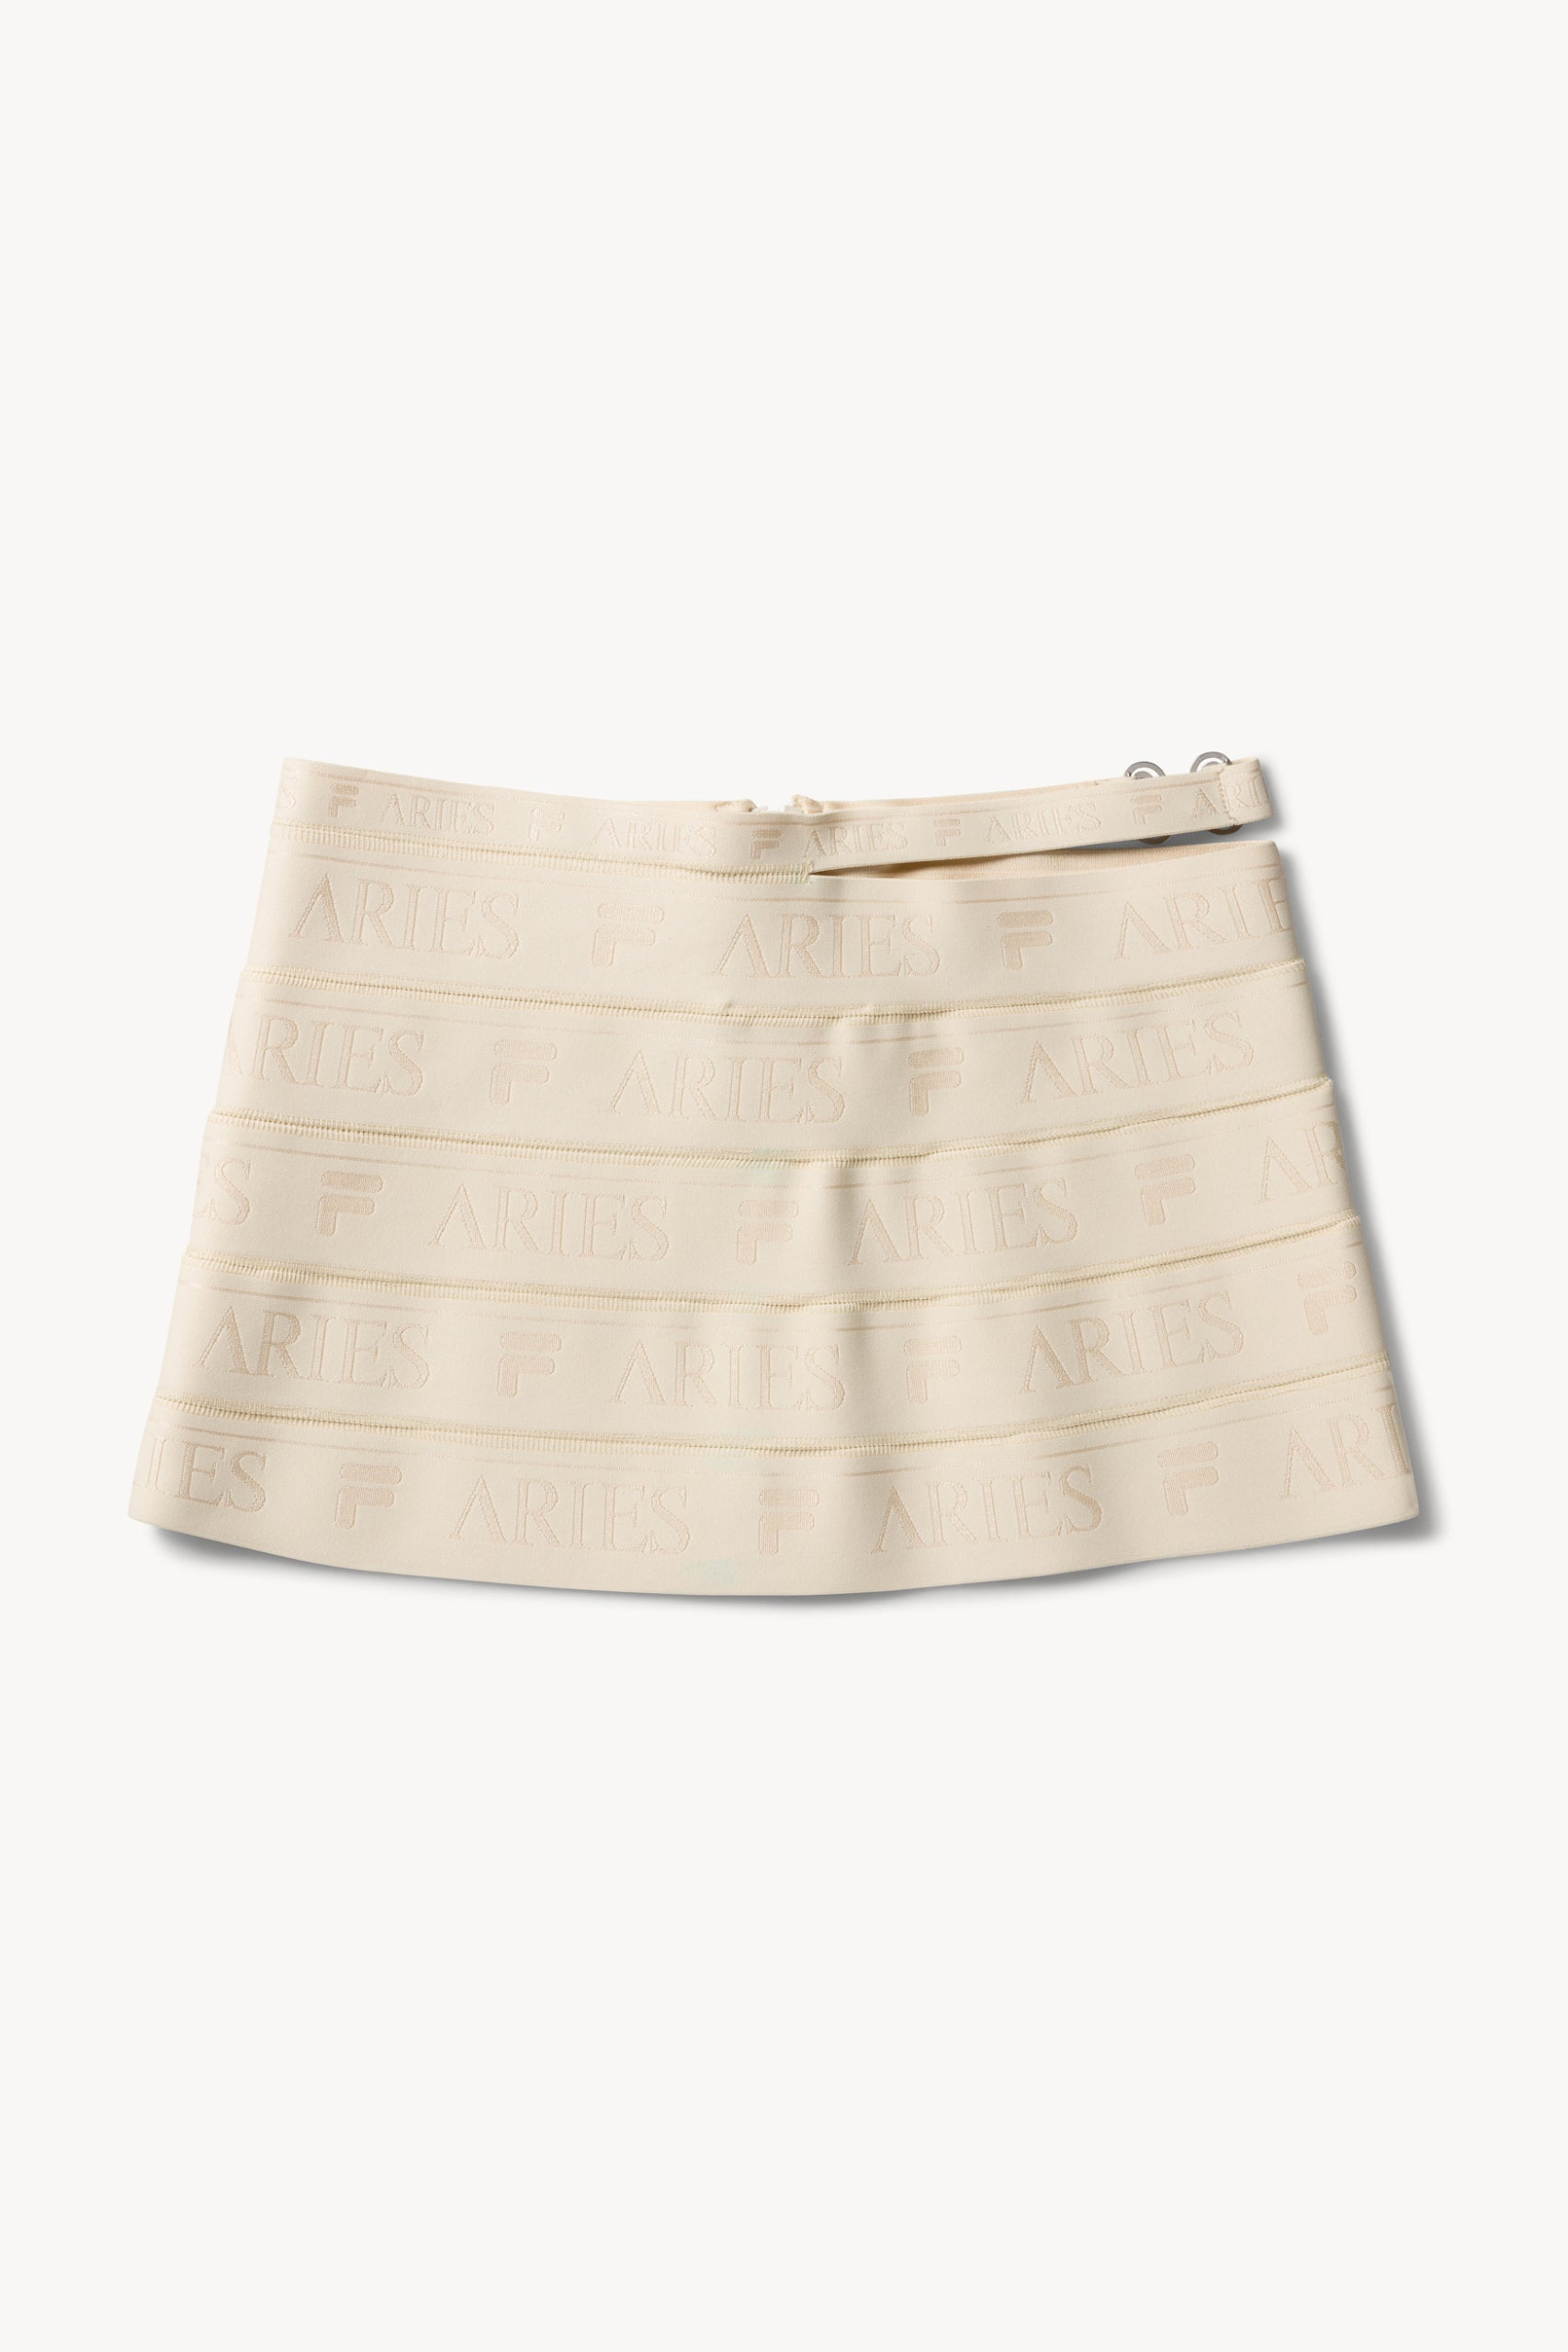 Load image into Gallery viewer, Aries x FILA Elastic Skirt